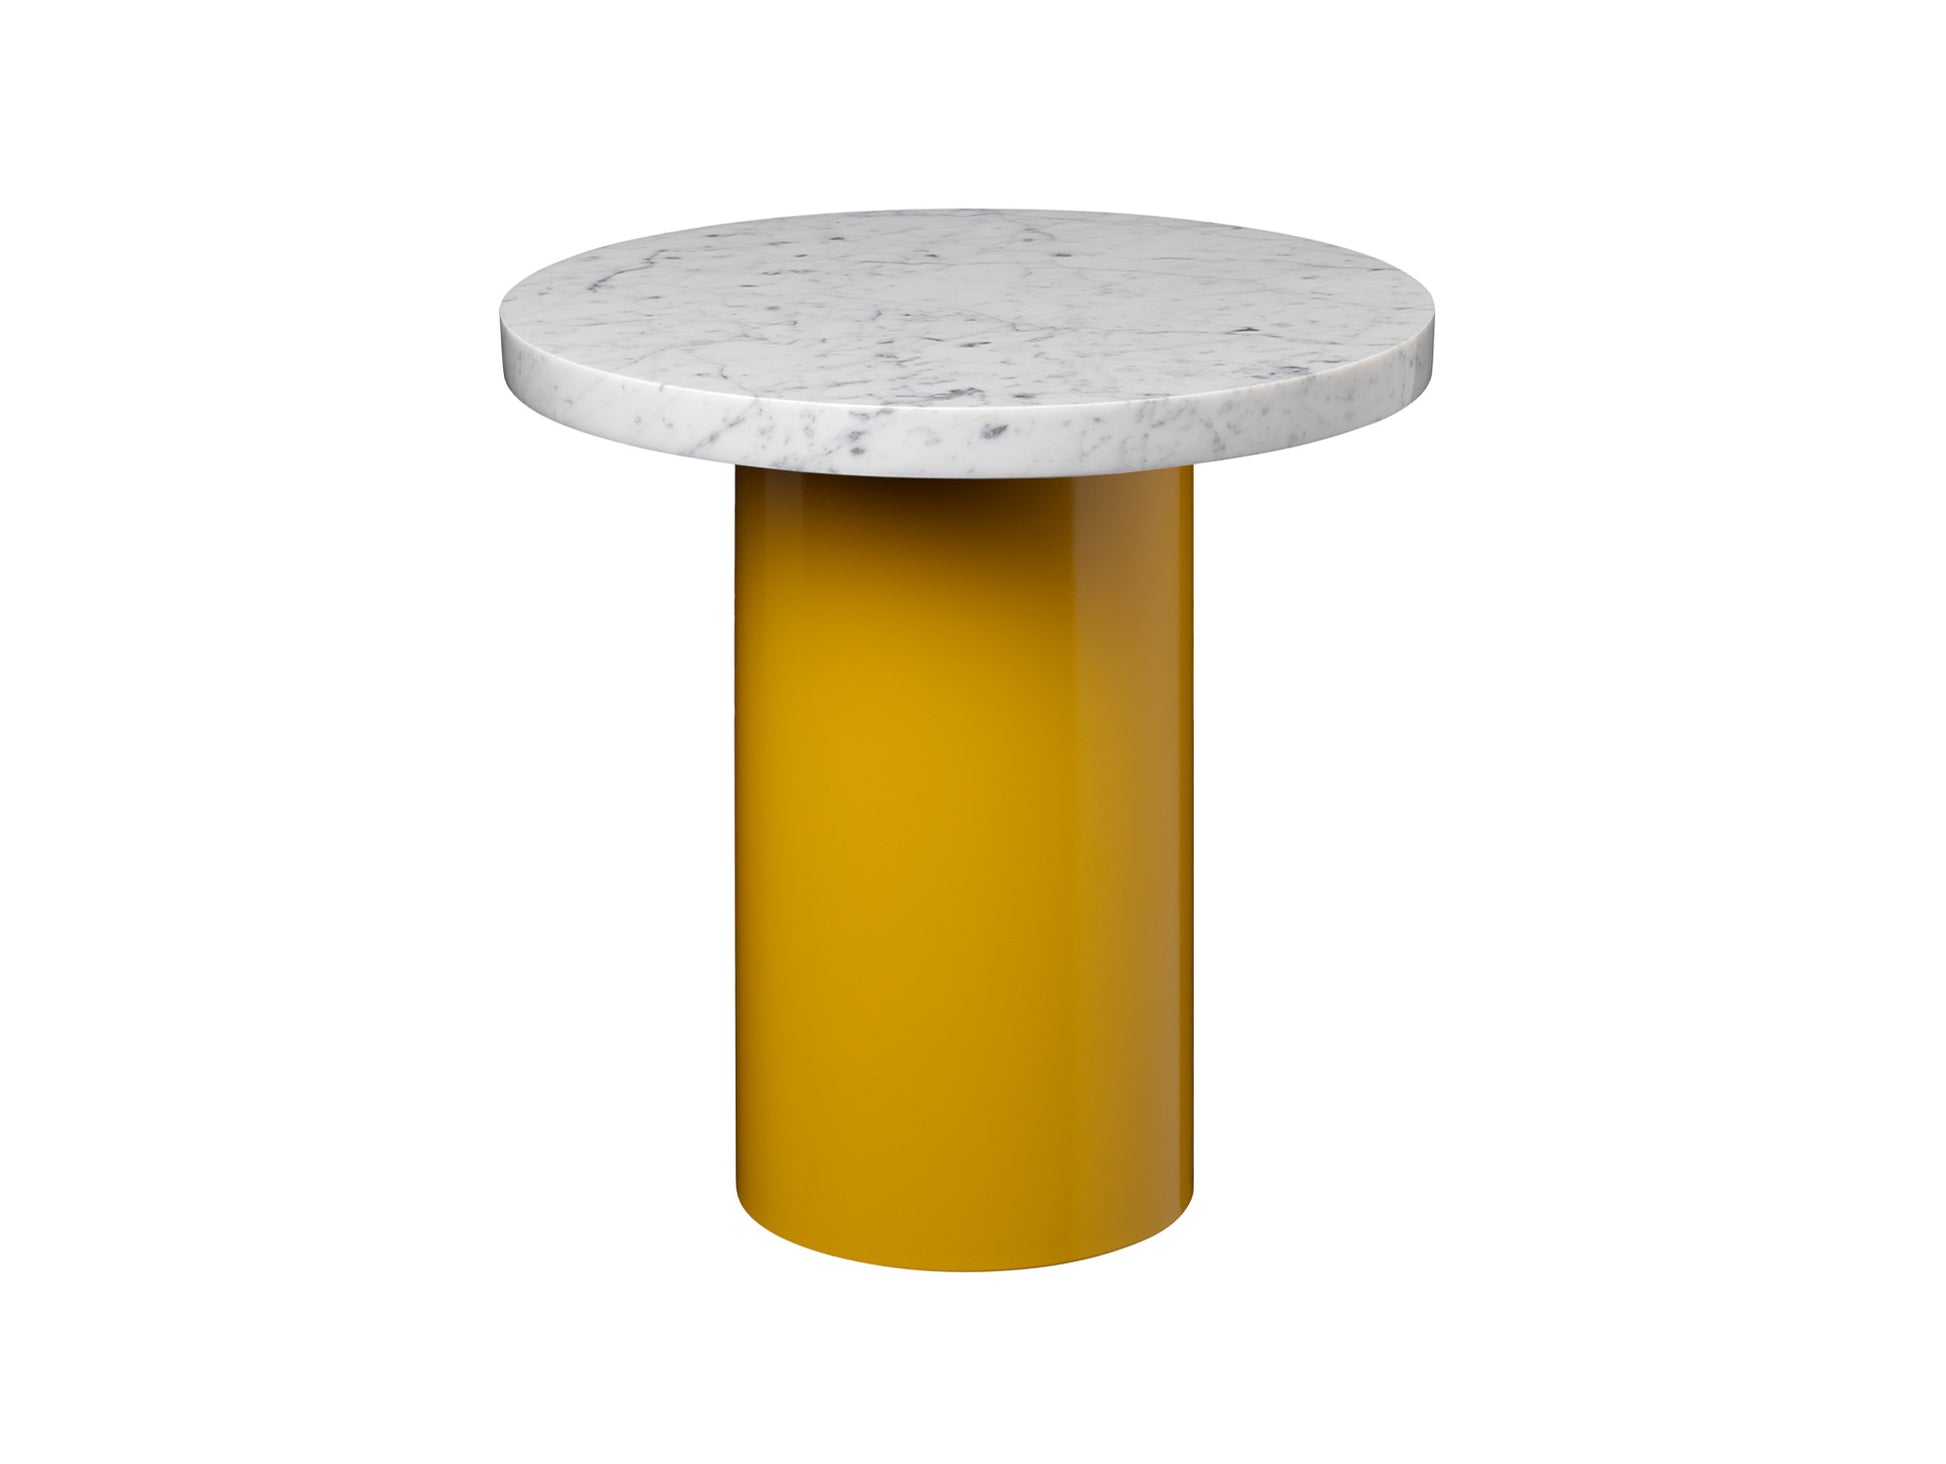 CT09 Enoki Side Table by e15 - (D 40 H 40 cm)  Bianco Carrara Marble Tabletop / Honey Yellow Steel Base